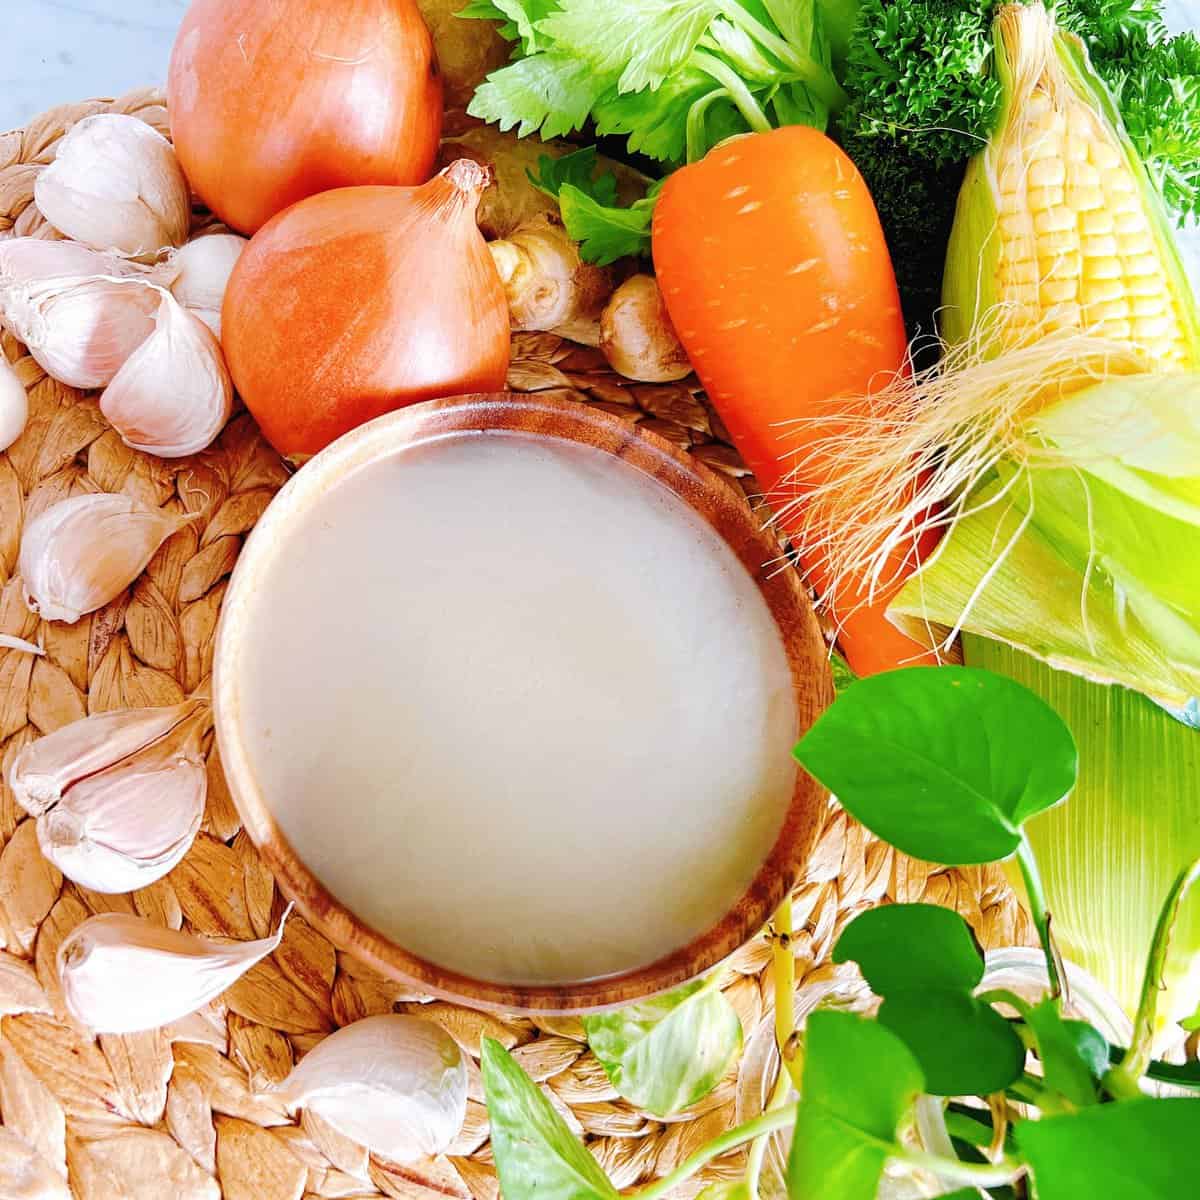 Broth a functional health food you need to know